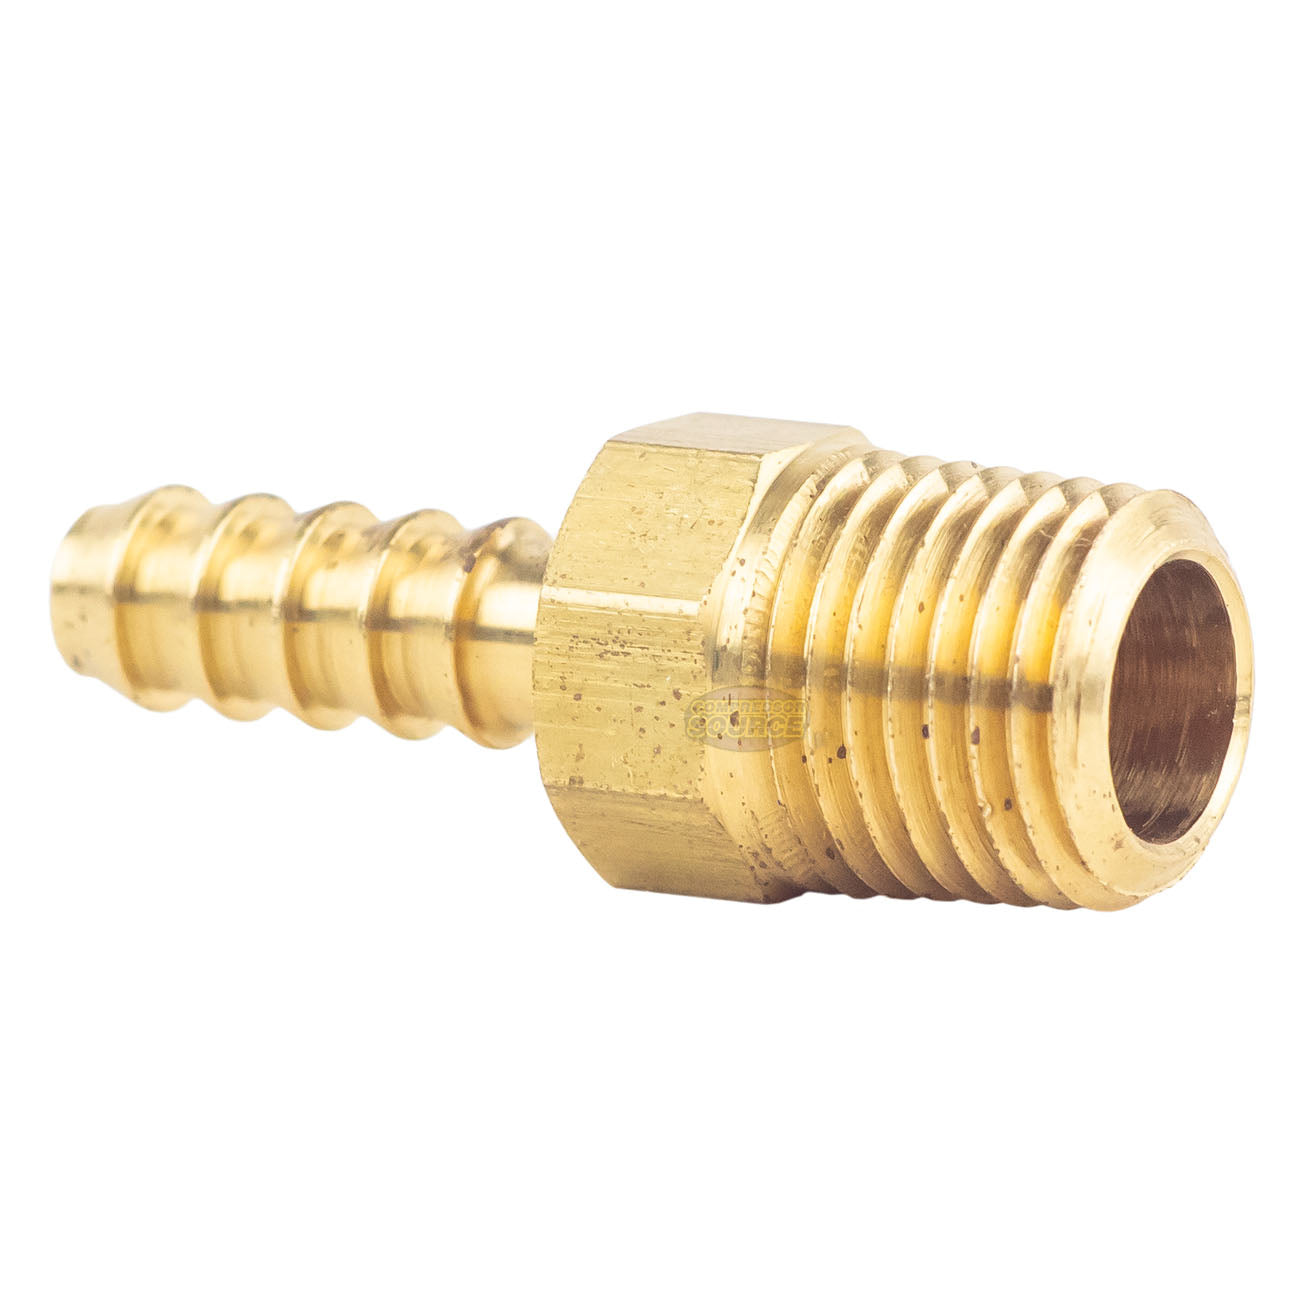 Brass Hose Barbs 1/4" Male NPT for 1/4" ID Hoses Barbed Fitting Air Fuel 4 Pack